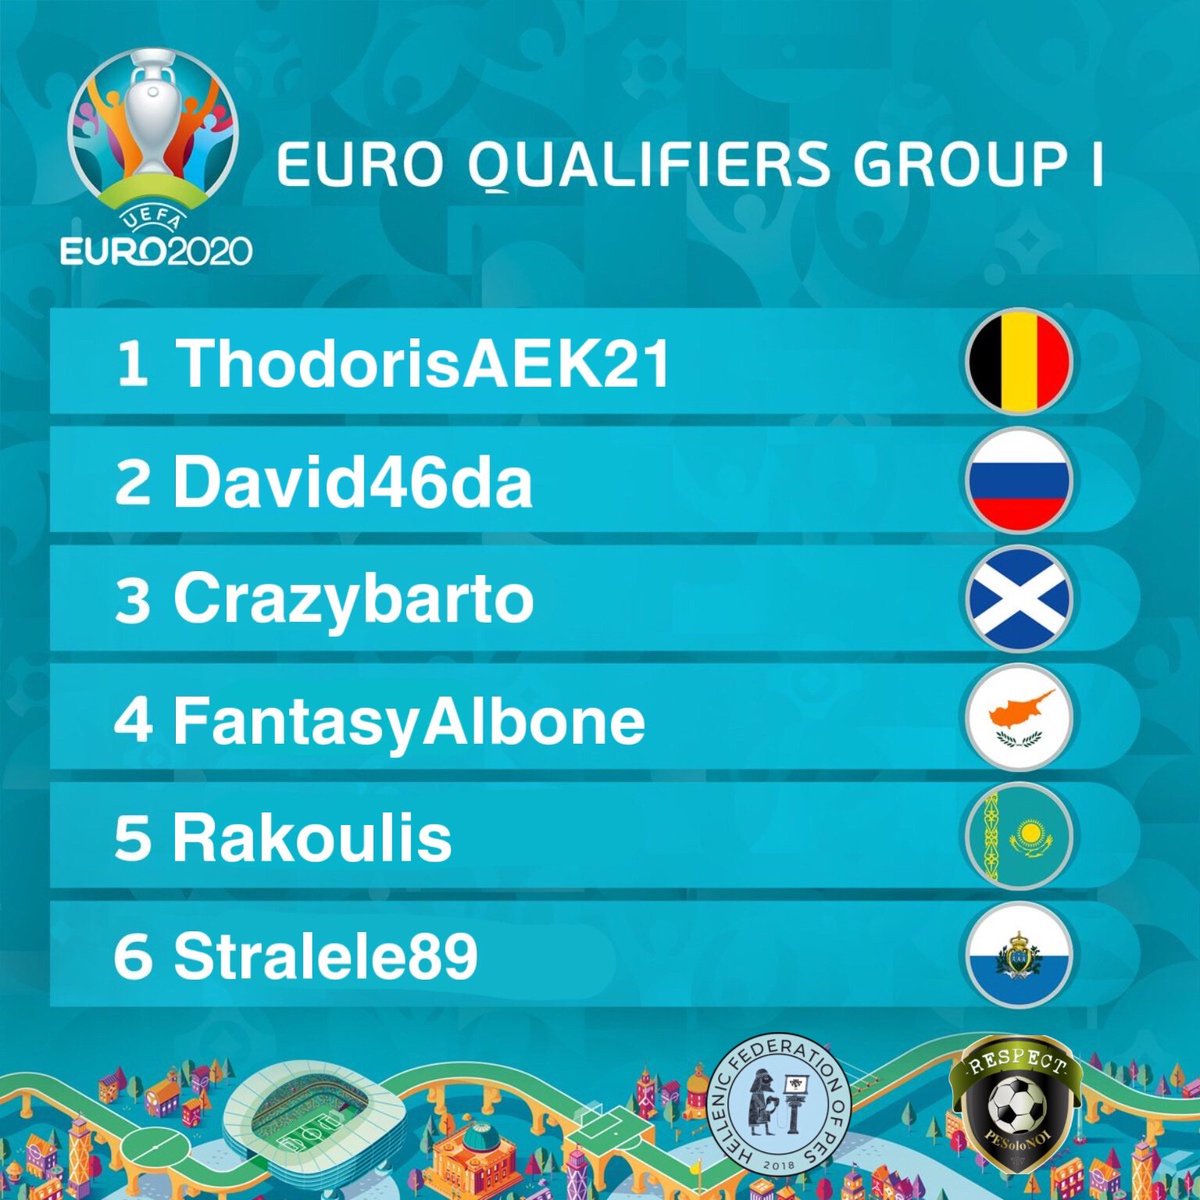 🇬🇷🇮🇹 #Euro_2020 group stage
💪 #HFP and #PESoloNOI
👉 Stay tuned😉😉

#HFP_Community | #eFootballPES2020 | #PlayingIsBelieving | #Euro

🇬🇷🇨🇾 ™️ #HELLENIC_FEDERATION_OF_PES©️